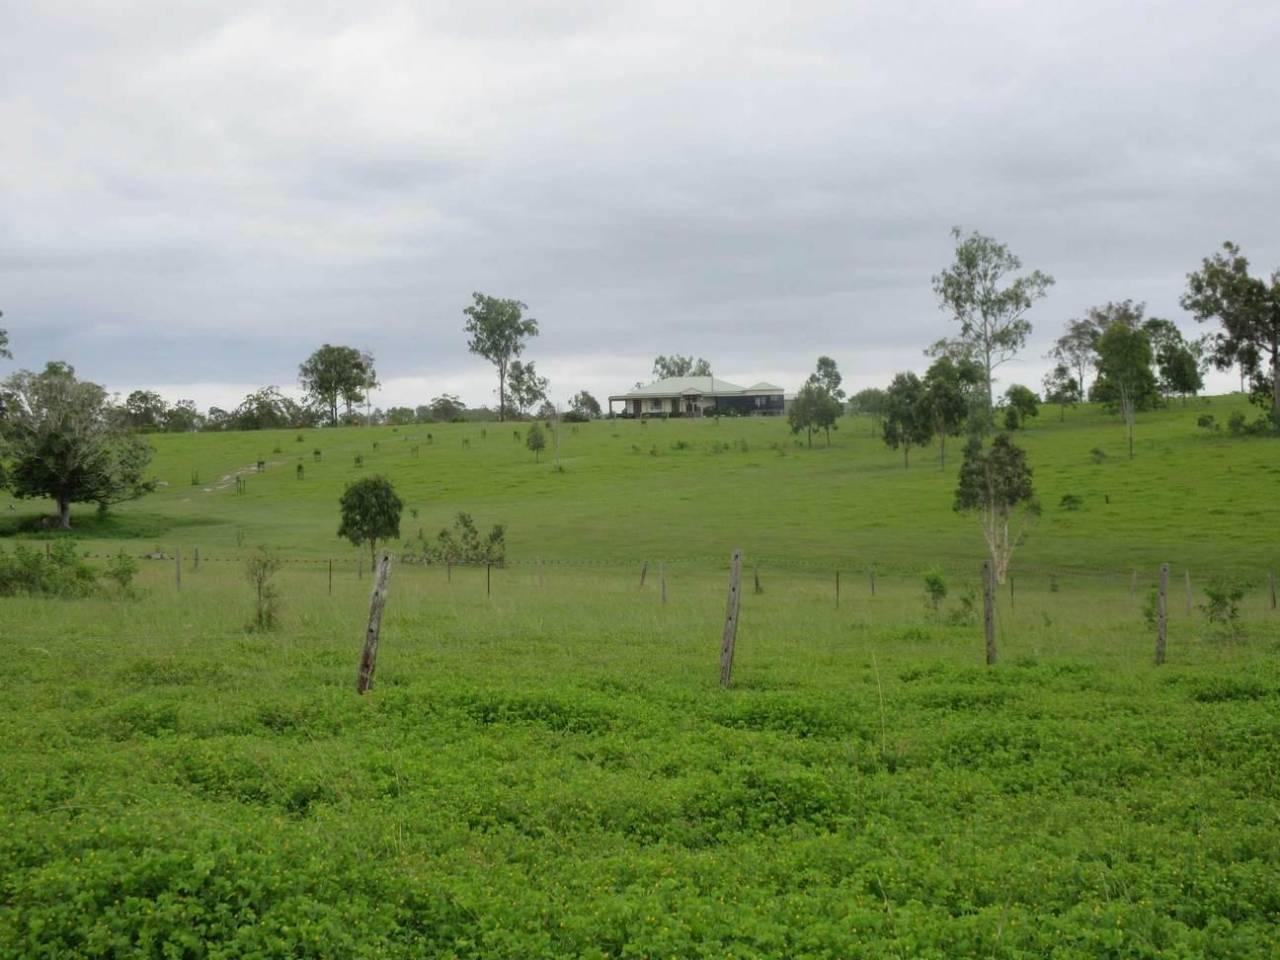 How Much Does Grazing Land Cost Per Acre: Farmbuy.com Buyers' Guide